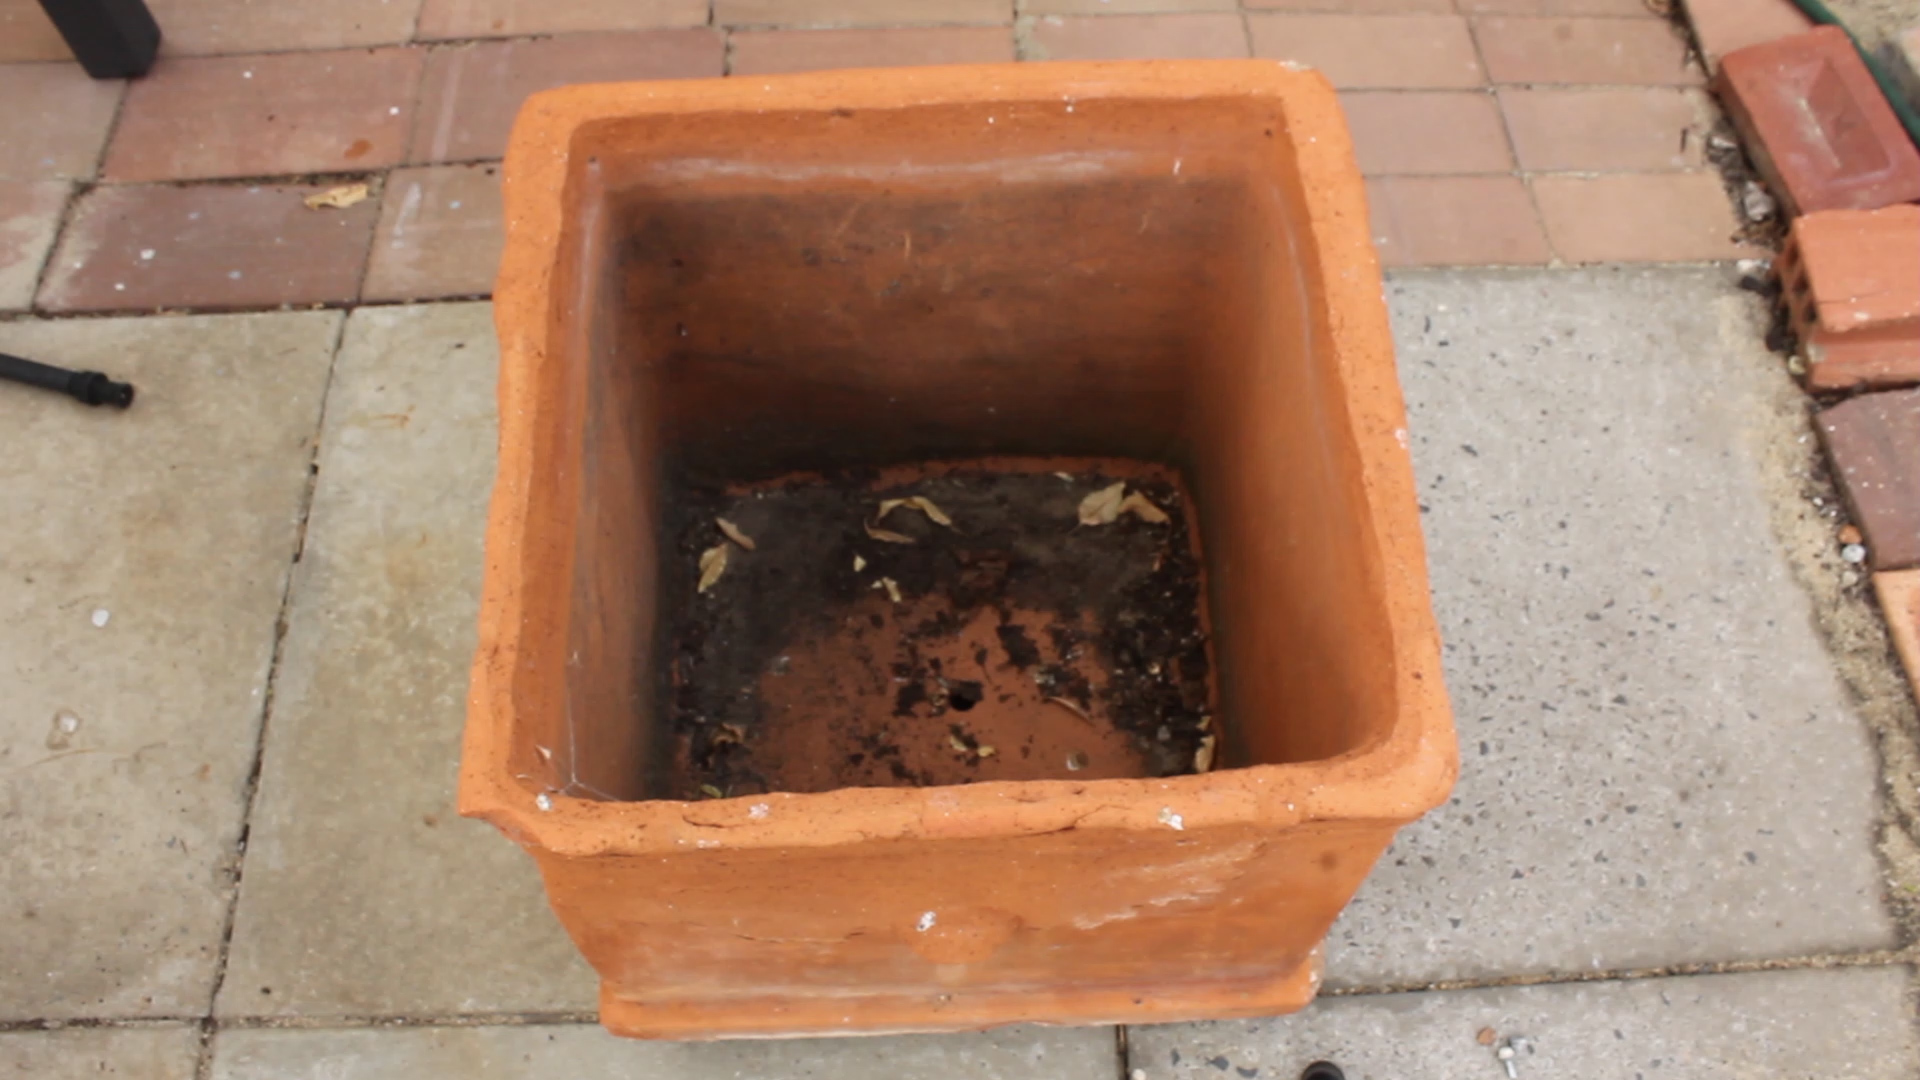 The pot I want to plant my bay Tree into. Internal Width: 380 mm Lengh: 375 mm Depth: 360 mm